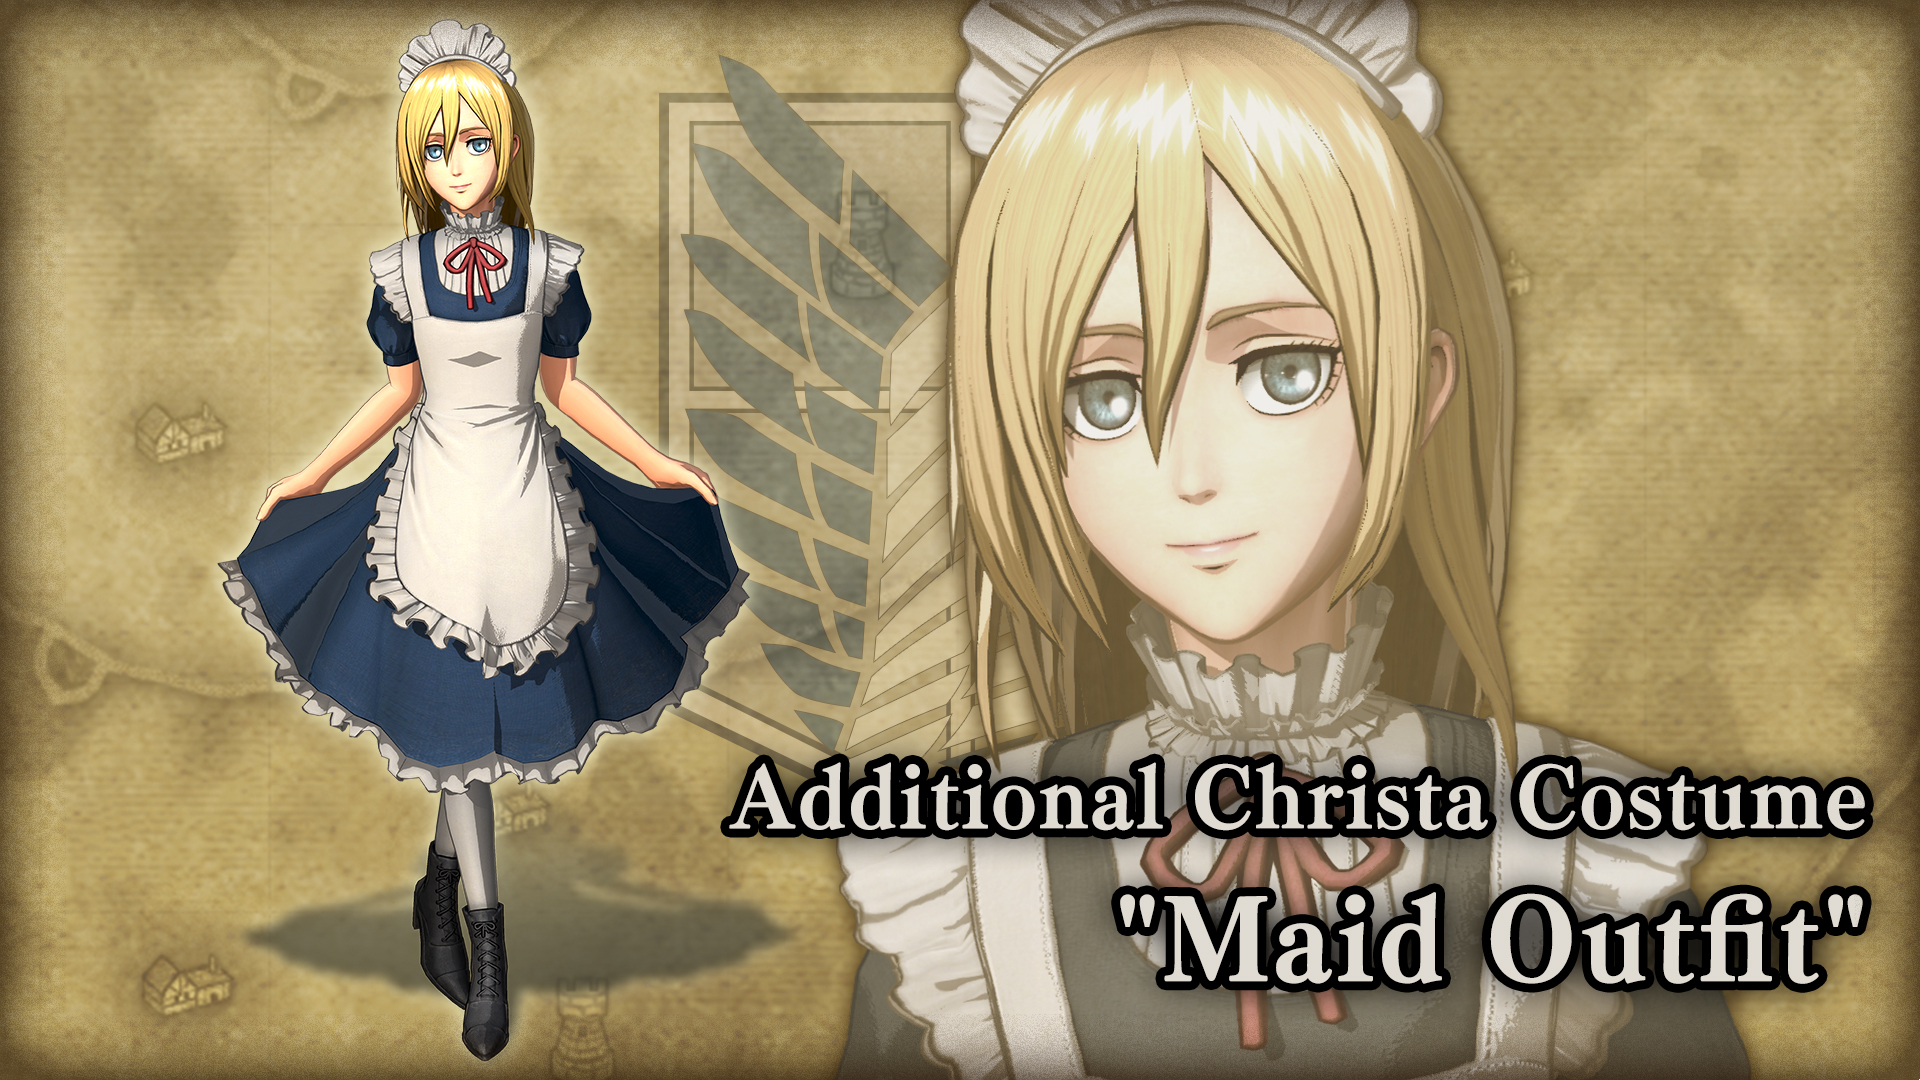 Additional Christa Costume: "Maid Outfit"